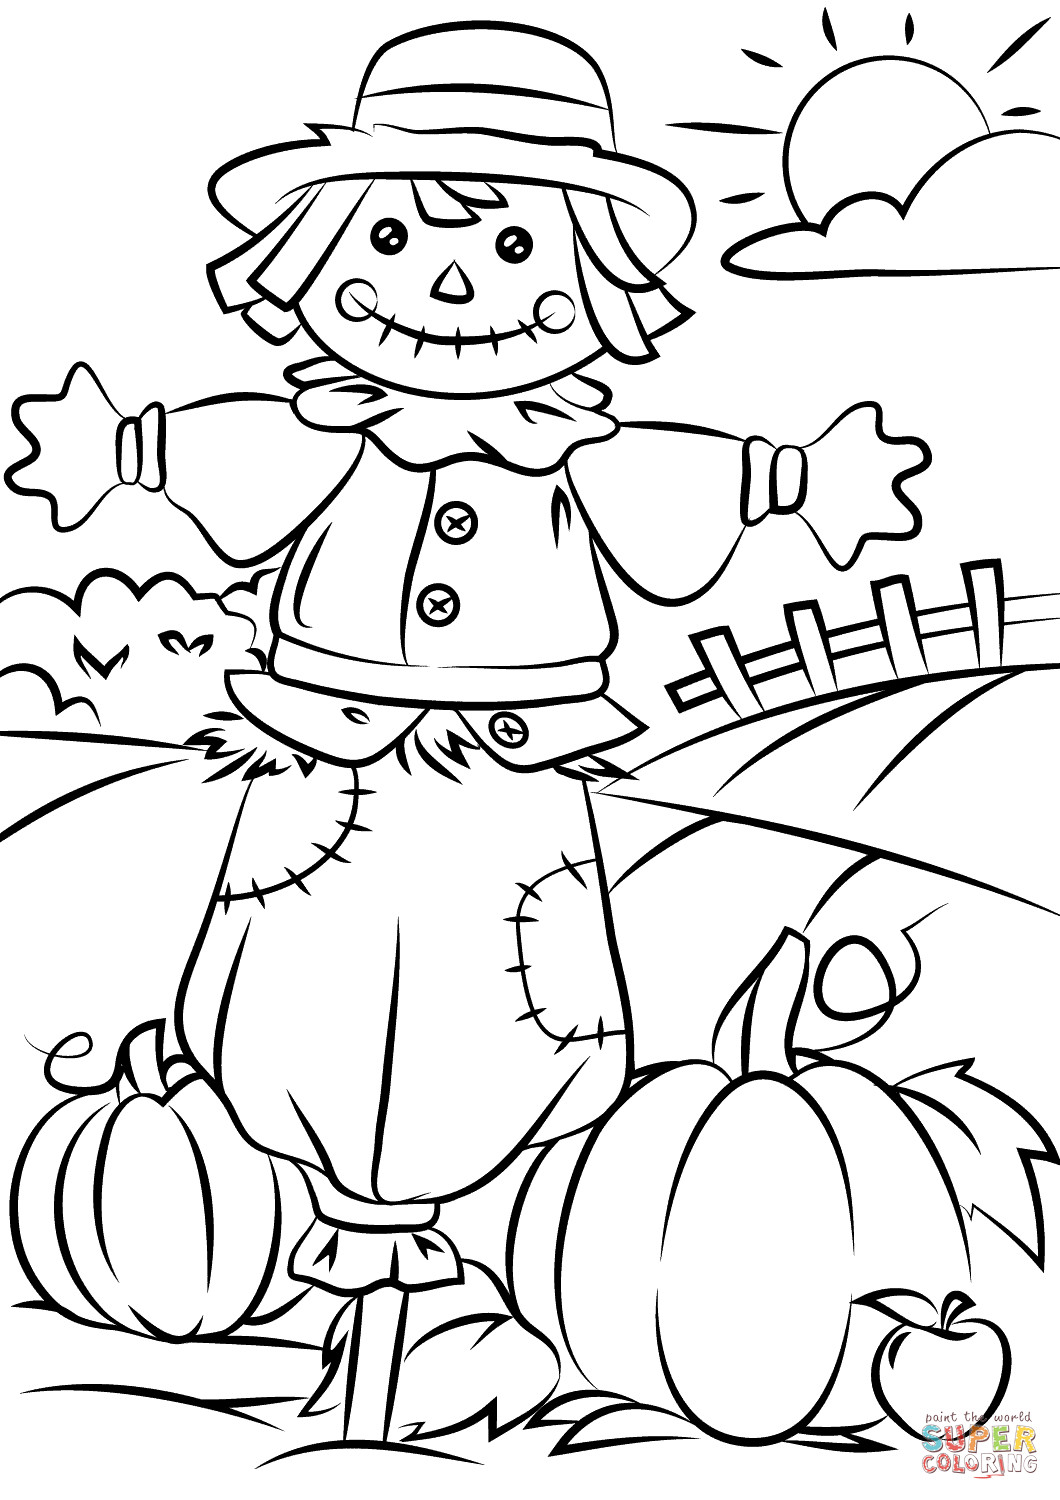 Kids Coloring Pages Fall
 Coloring Autumn Scene with Scarecrow Coloring Page Free